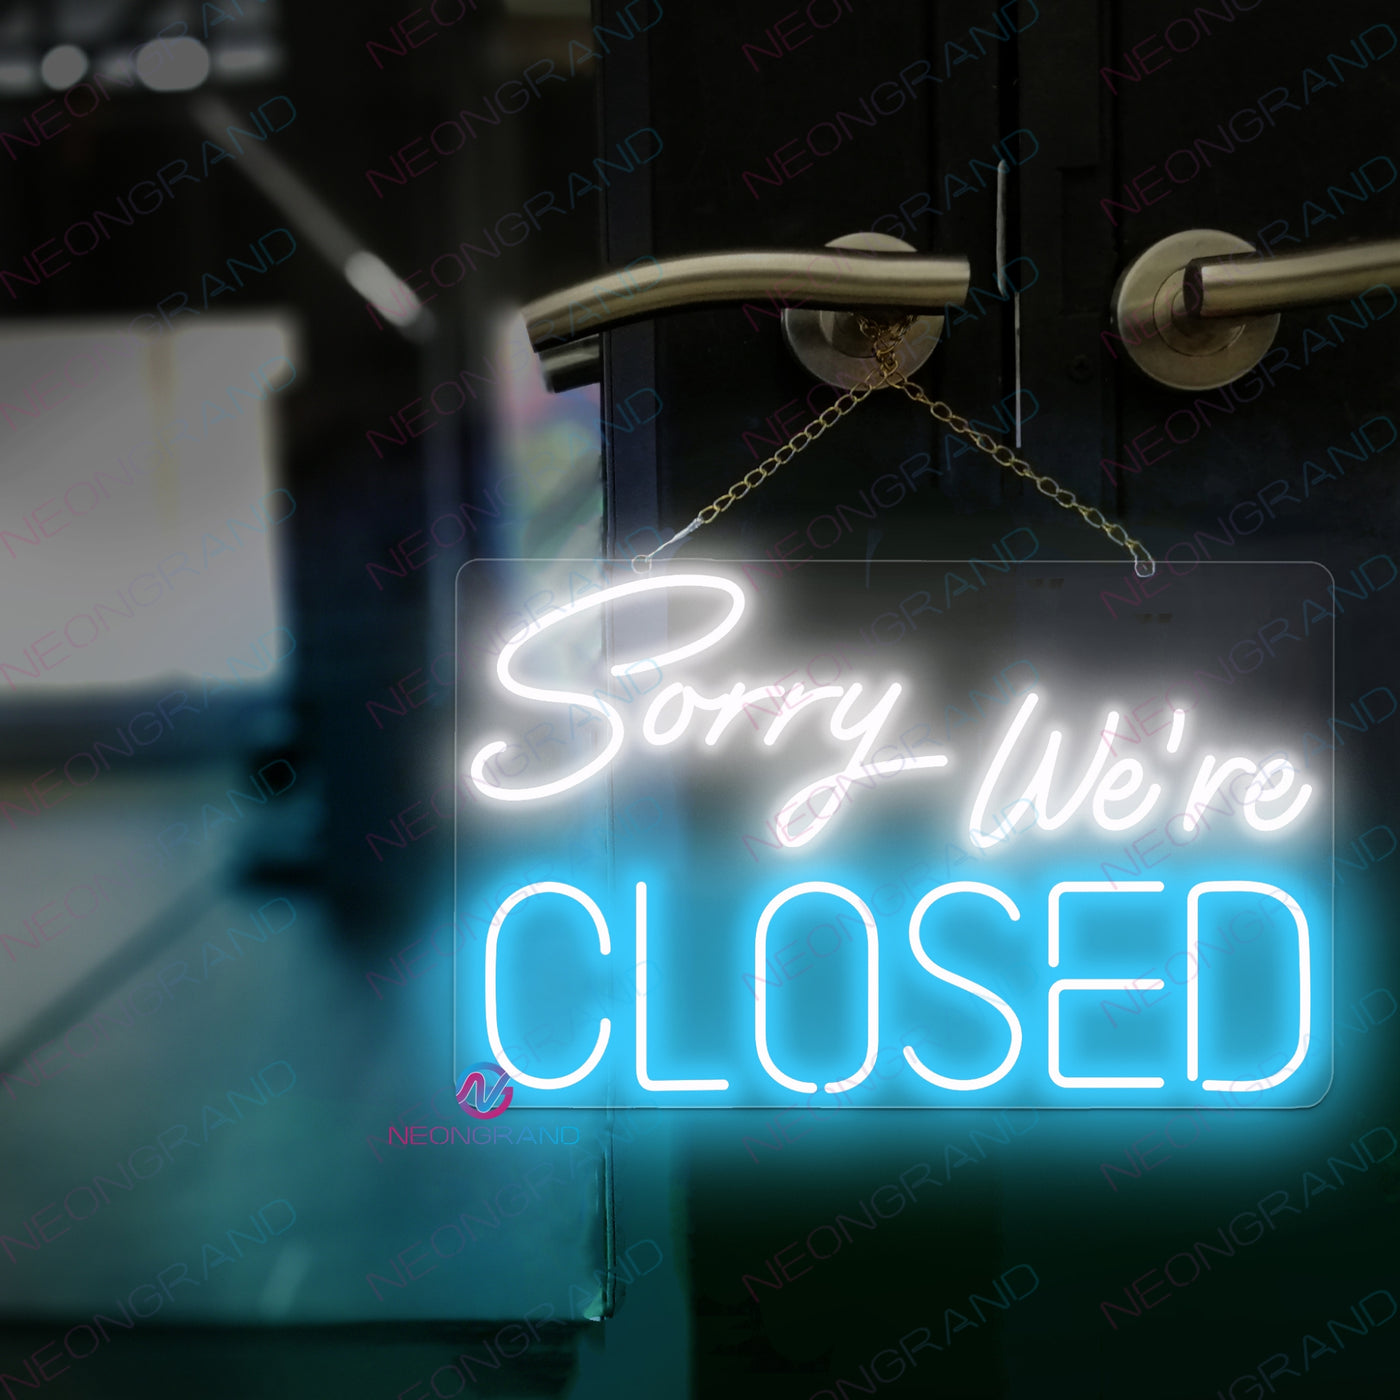 Sorry We're Closed Neon Sign Led Light